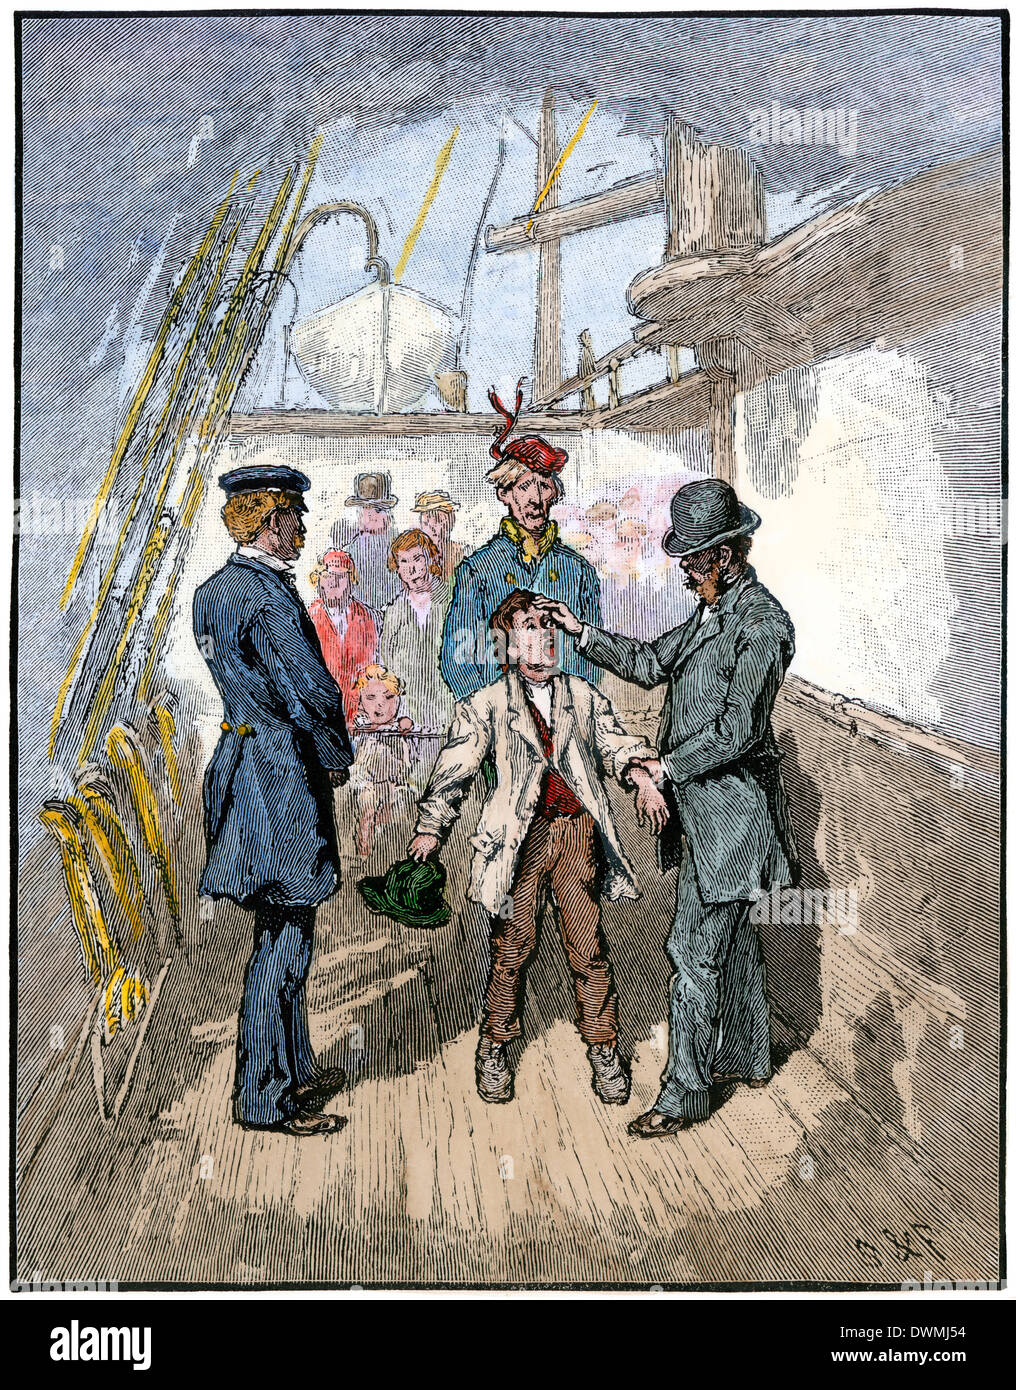 Castle Island health inspectors examining an immigrant boy, 1870s. Hand-colored woodcut Stock Photo